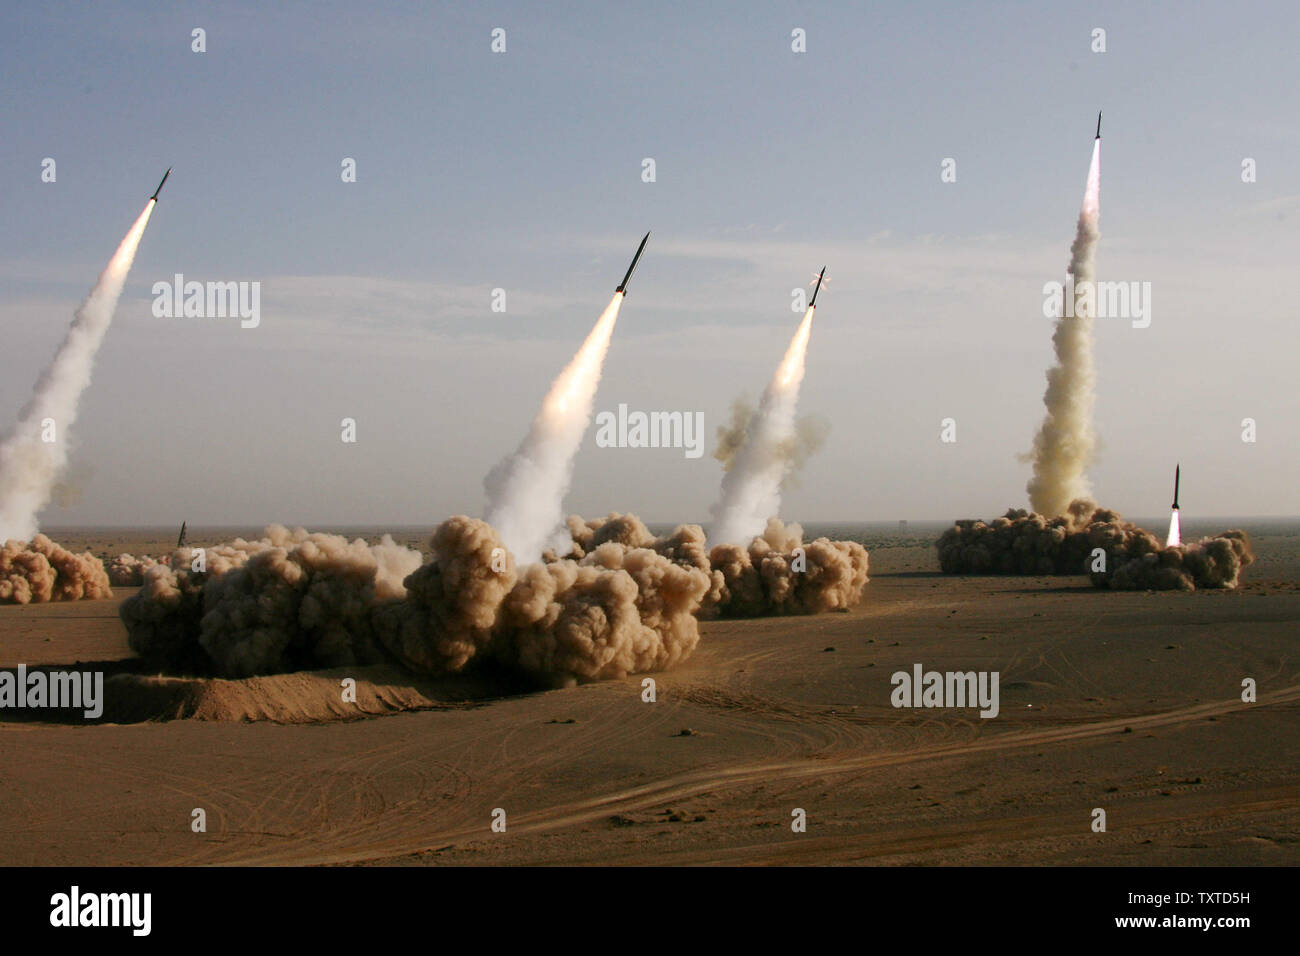 Iranian missiles are launched during a military maneuver dubbed 'al-Tasoul al-Aazam,' or Greater Prophet, in a desert near the holy city of Qom 80 miles (130 kilometers) south of Tehran on November 2, 2006. During the 10-day maneuvers across several parts of Iranian territory, the Gulf waters, and the Sea of Oman, the Iranian Revolutionary Guards will test long-range Shahab-2 and Shahab-3 ballistic missiles carrying cluster heads and new types of torpedoes fired by submarines and military vessels. The Iranian exercises follow similar maneuvers in Gulf waters by the United States and five other Stock Photo